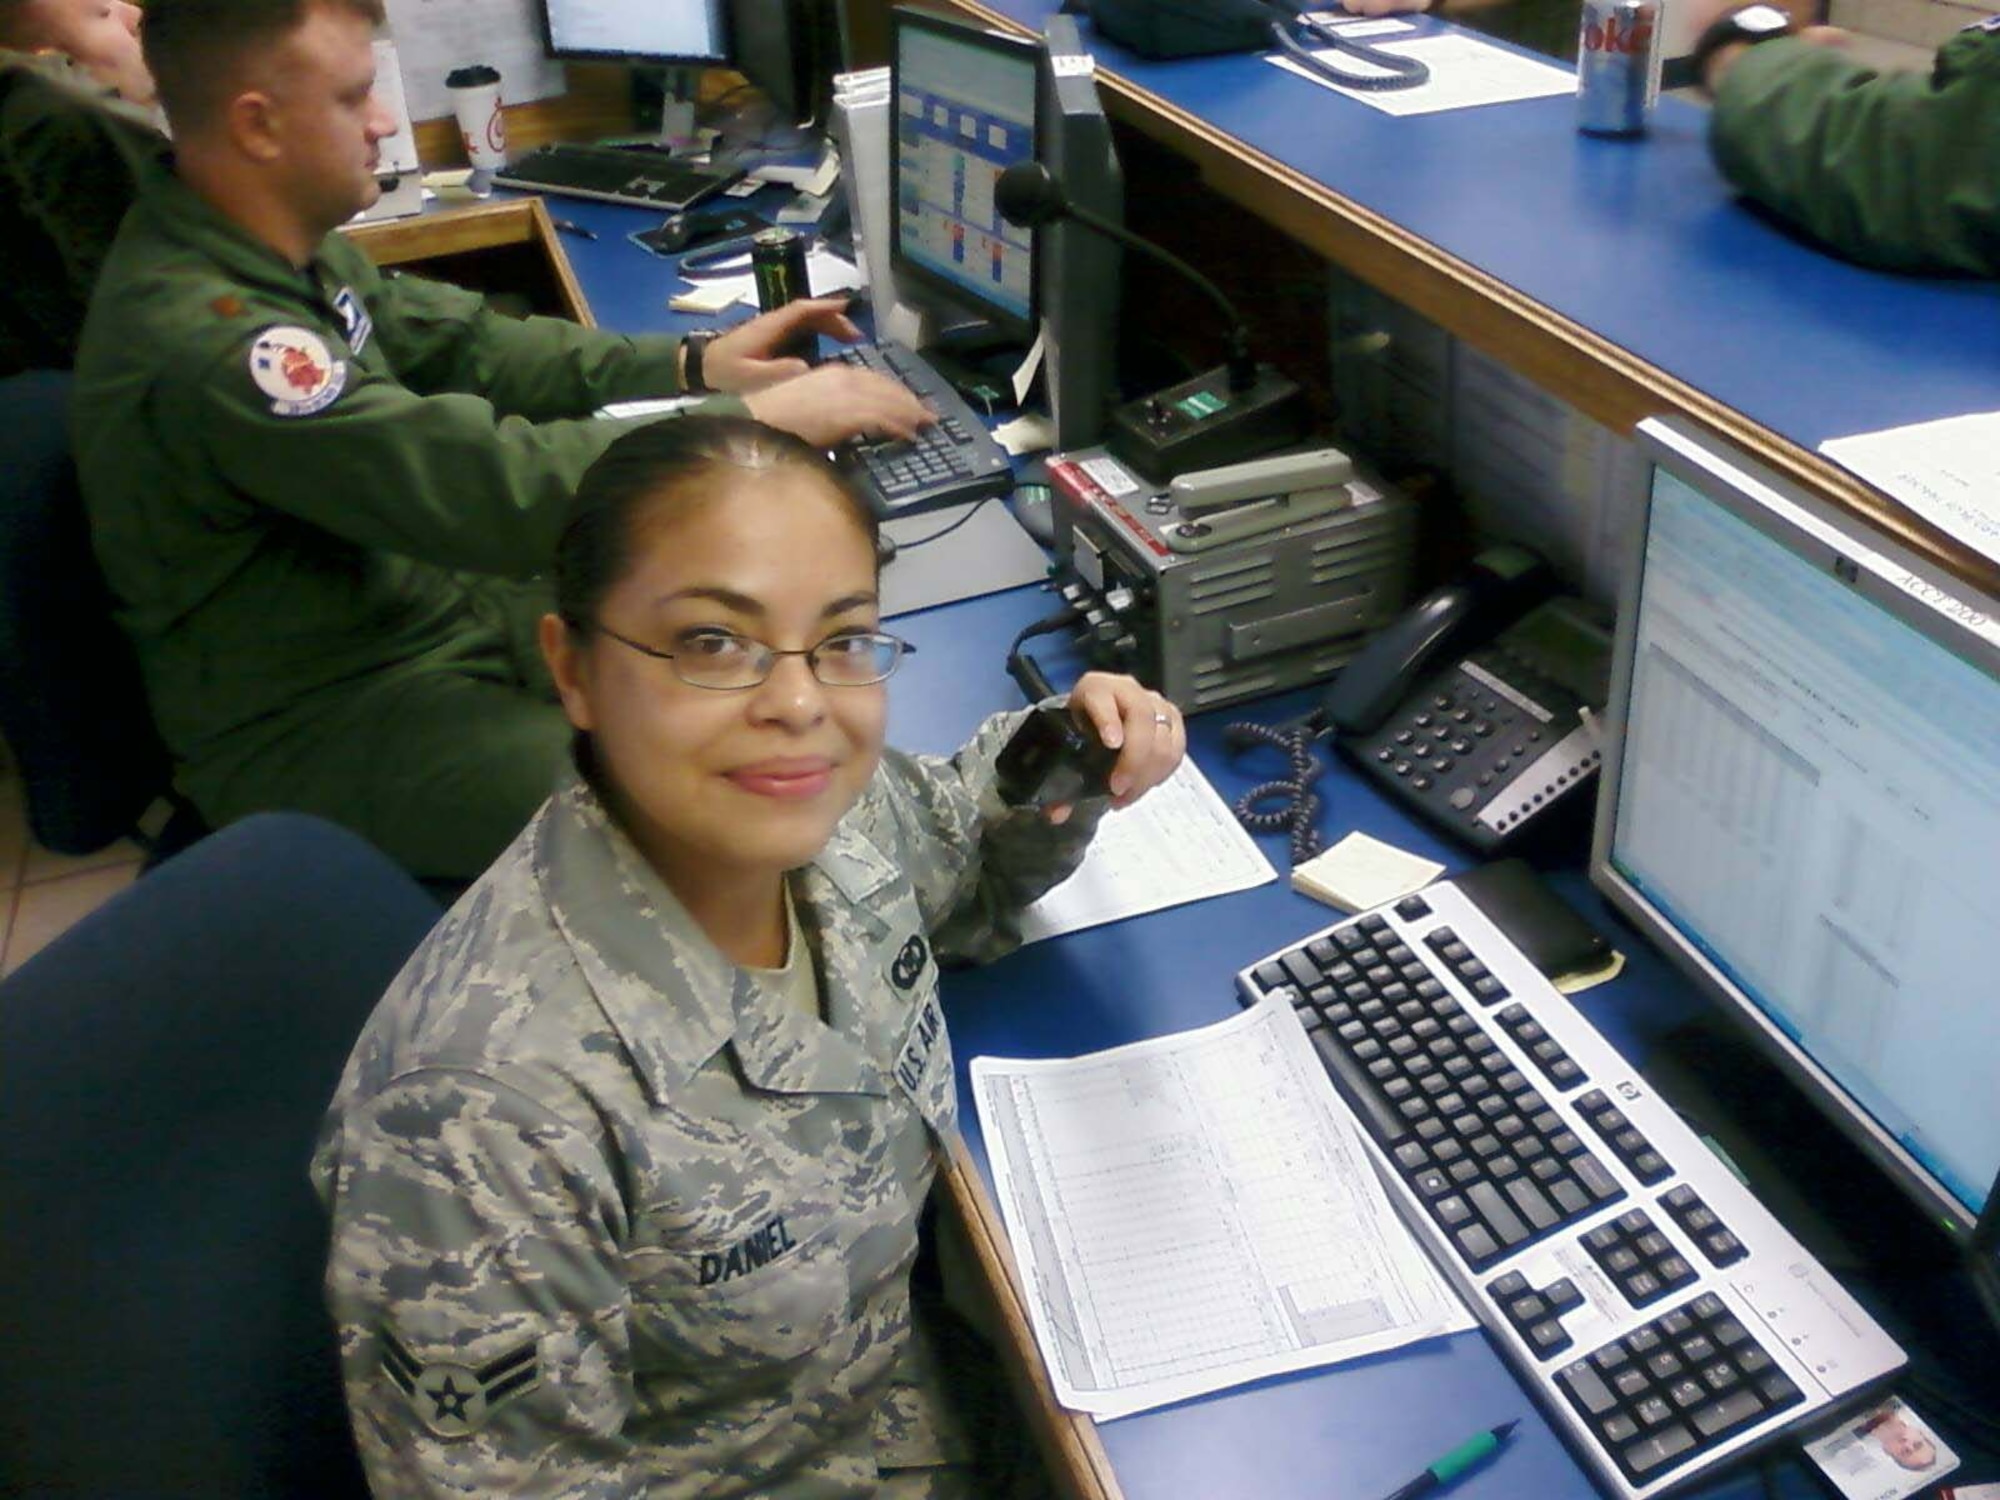 DYESS AIR FORCE BASE, Texas - Airman 1st Class Sylvia Daniel is this week's Warrior of the Week. Airman Daniel is assigned to the 28th Bomb Squadron.